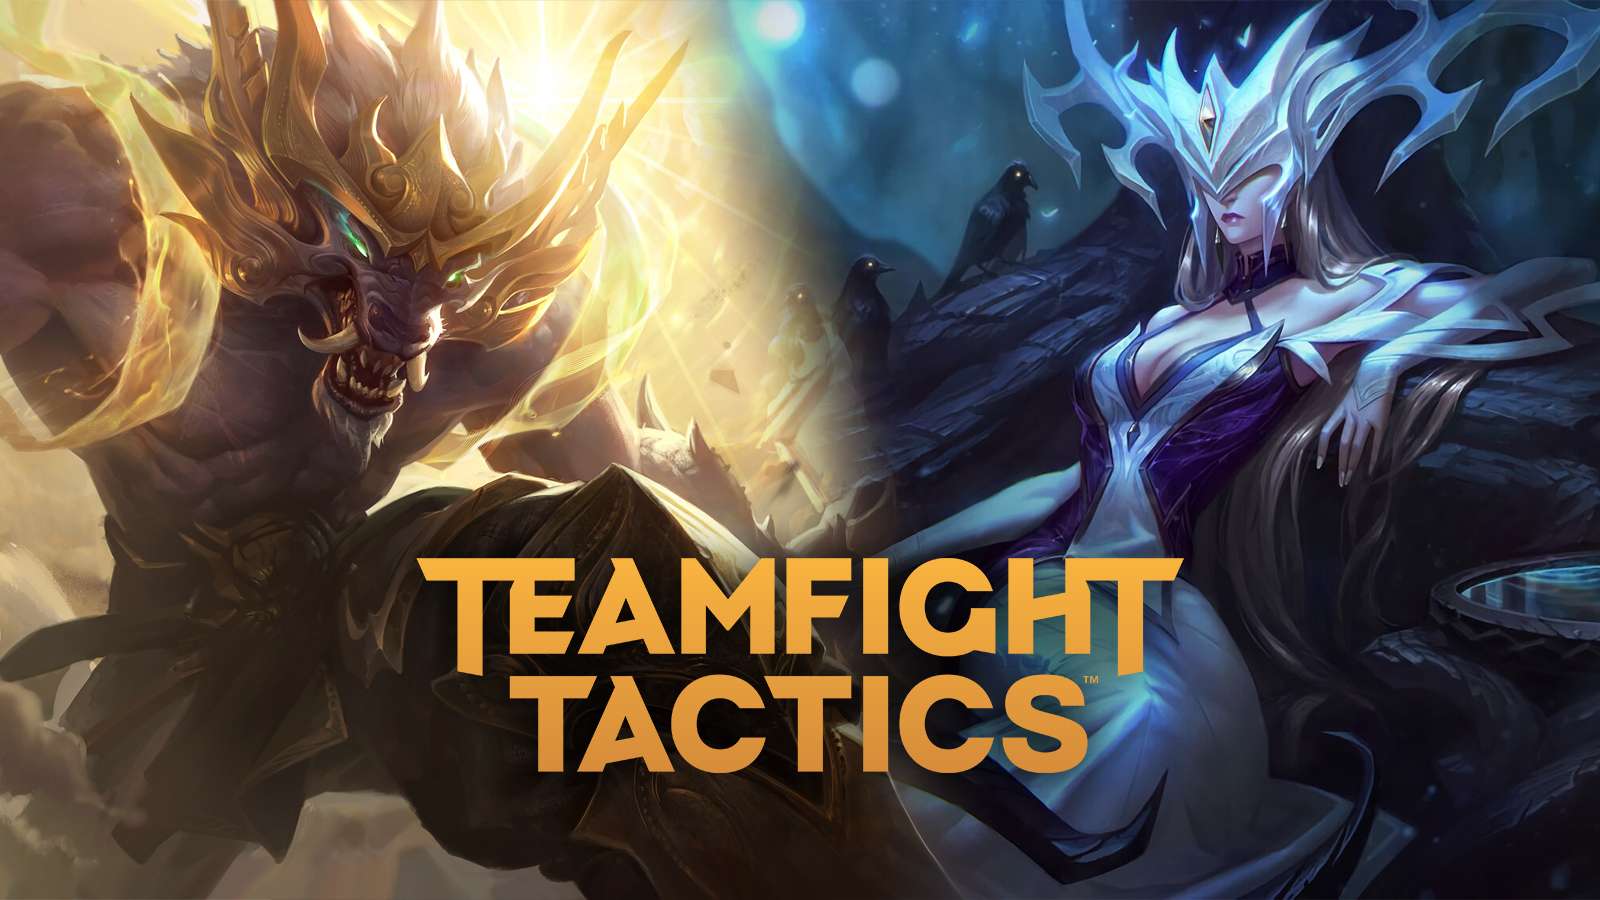 Warwick and Lissandra in TFT